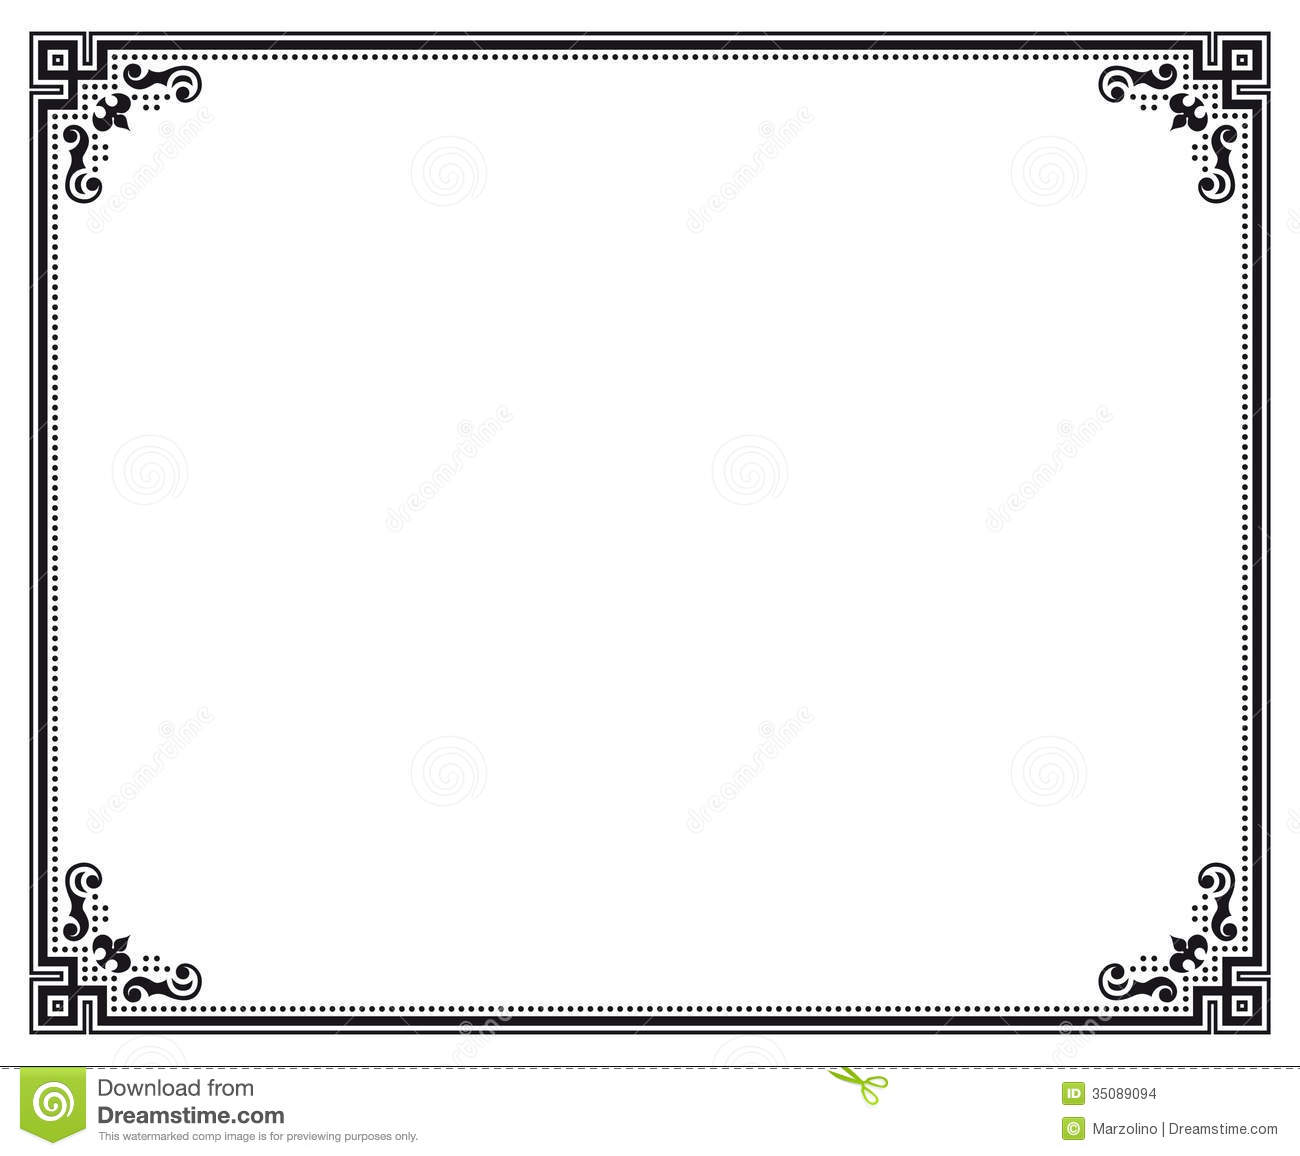 Black and White Certificate Borders